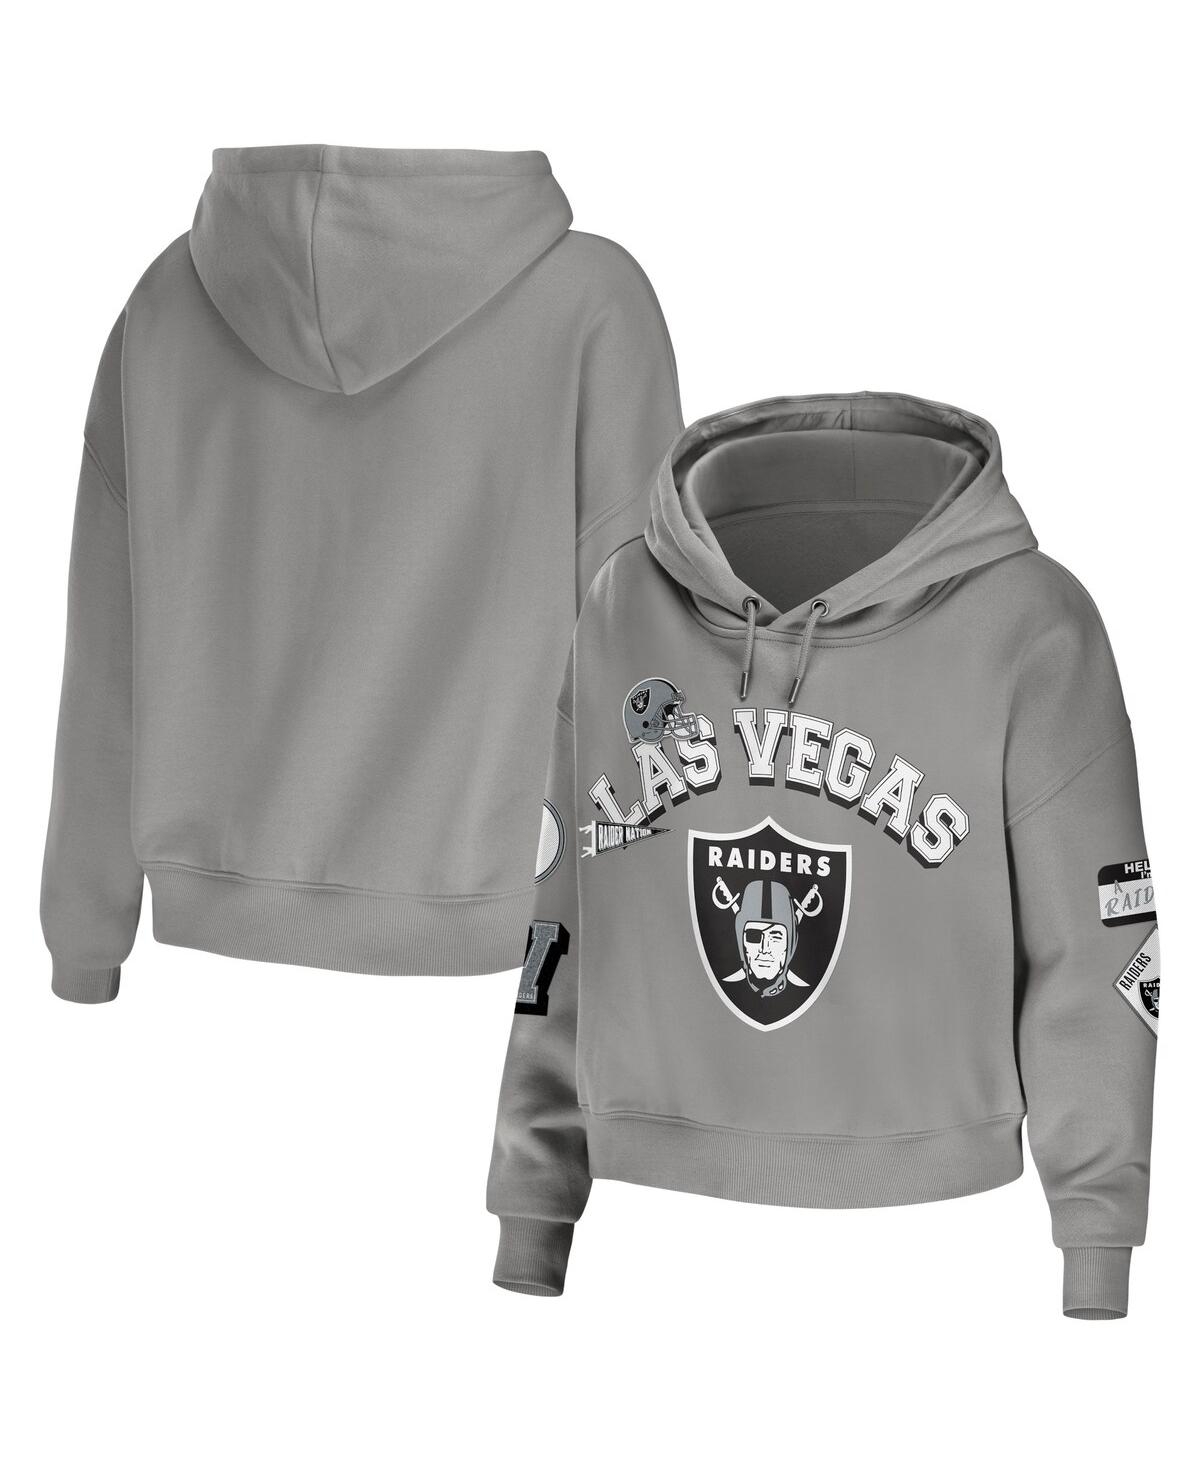 Shop Wear By Erin Andrews Women's  Gray Las Vegas Raiders Plus Size Modest Cropped Pullover Hoodie